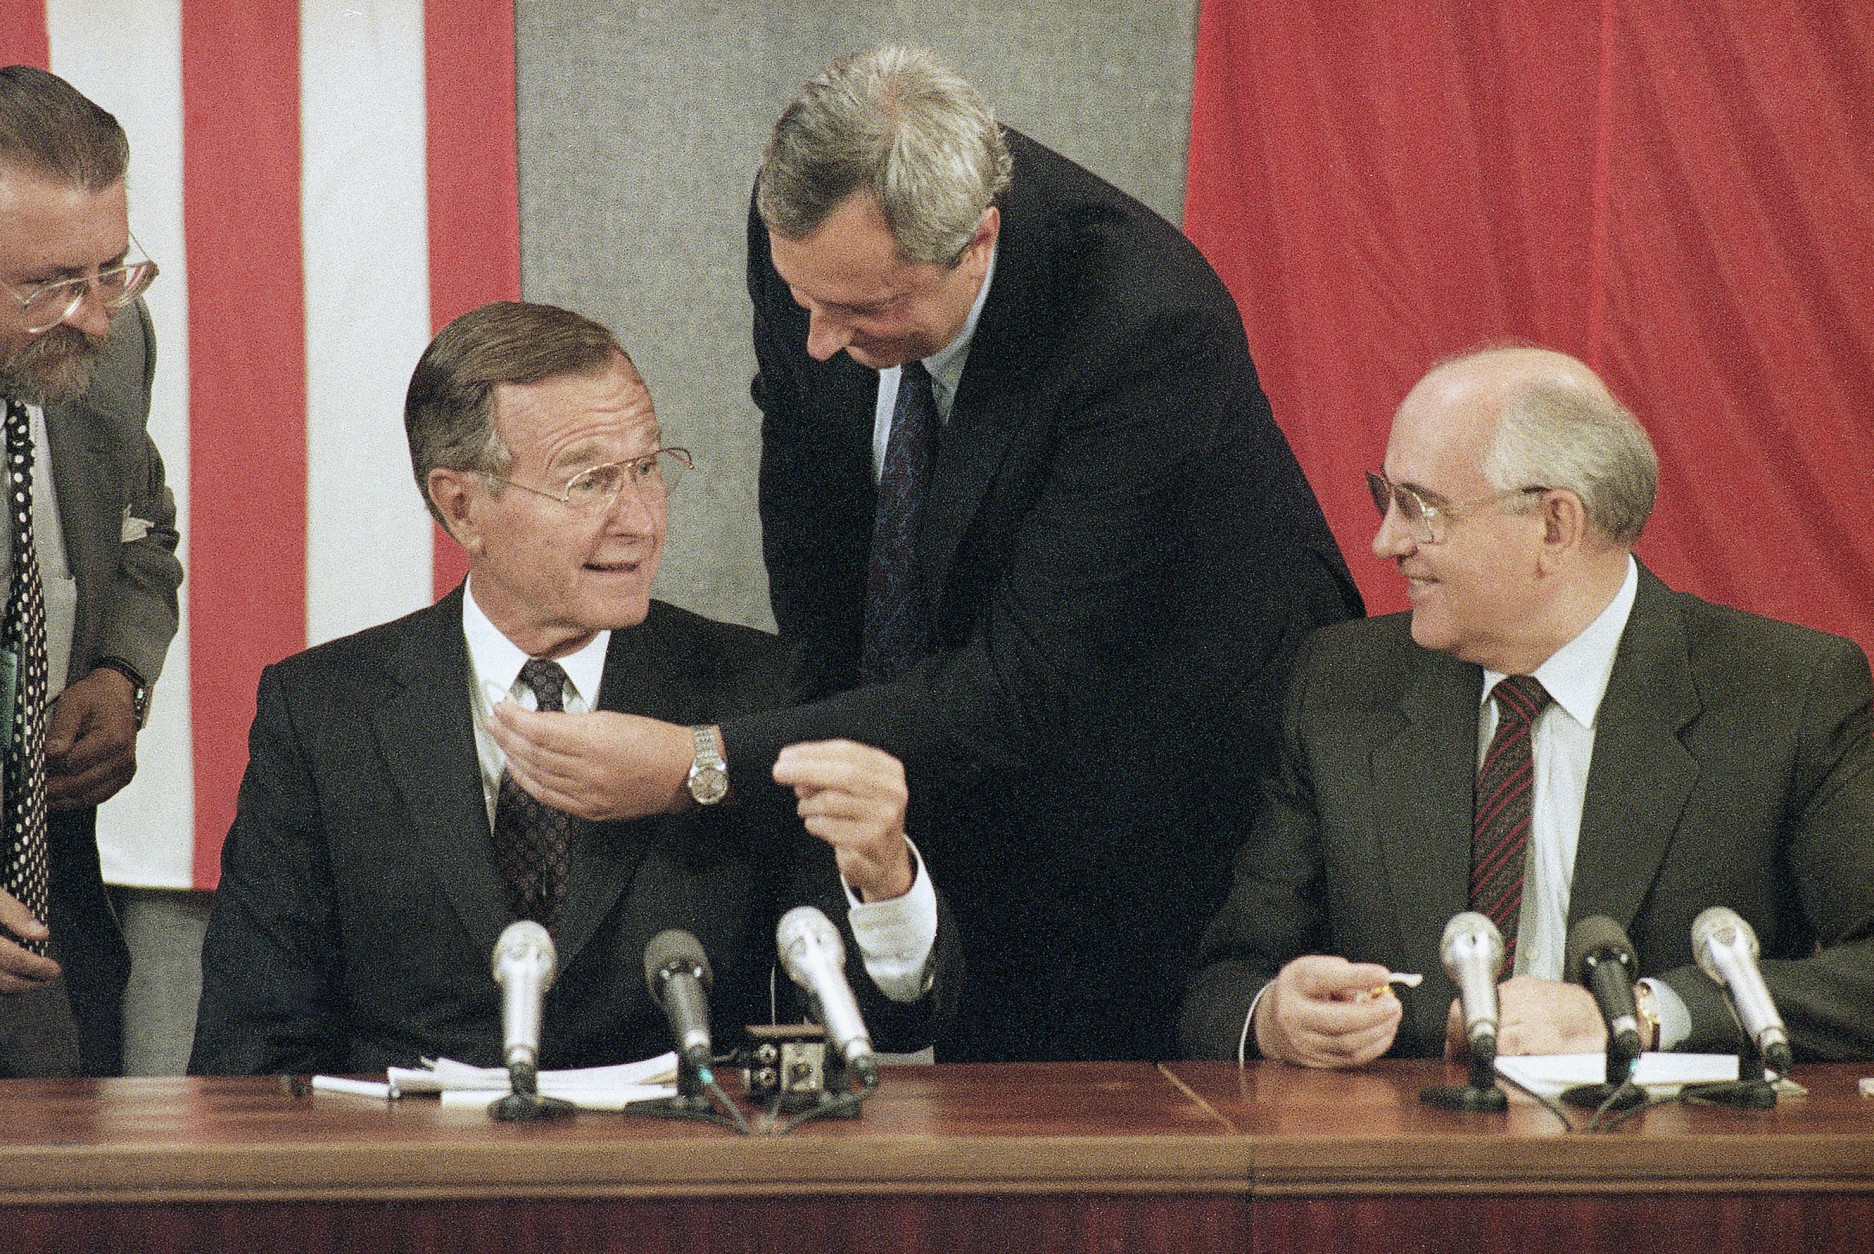 U.S. President George H. Bush and Soviet President Mikhail Gorbachev joke during their joint news conference in Moscow, Wednesday, July 31, 1991, as technician adjusts Bush's earpiece. Bush is indicating that he is listening on channel two which is used in simultaneous translation of Russian to English. (AP Photo/Marcia Nightwander)